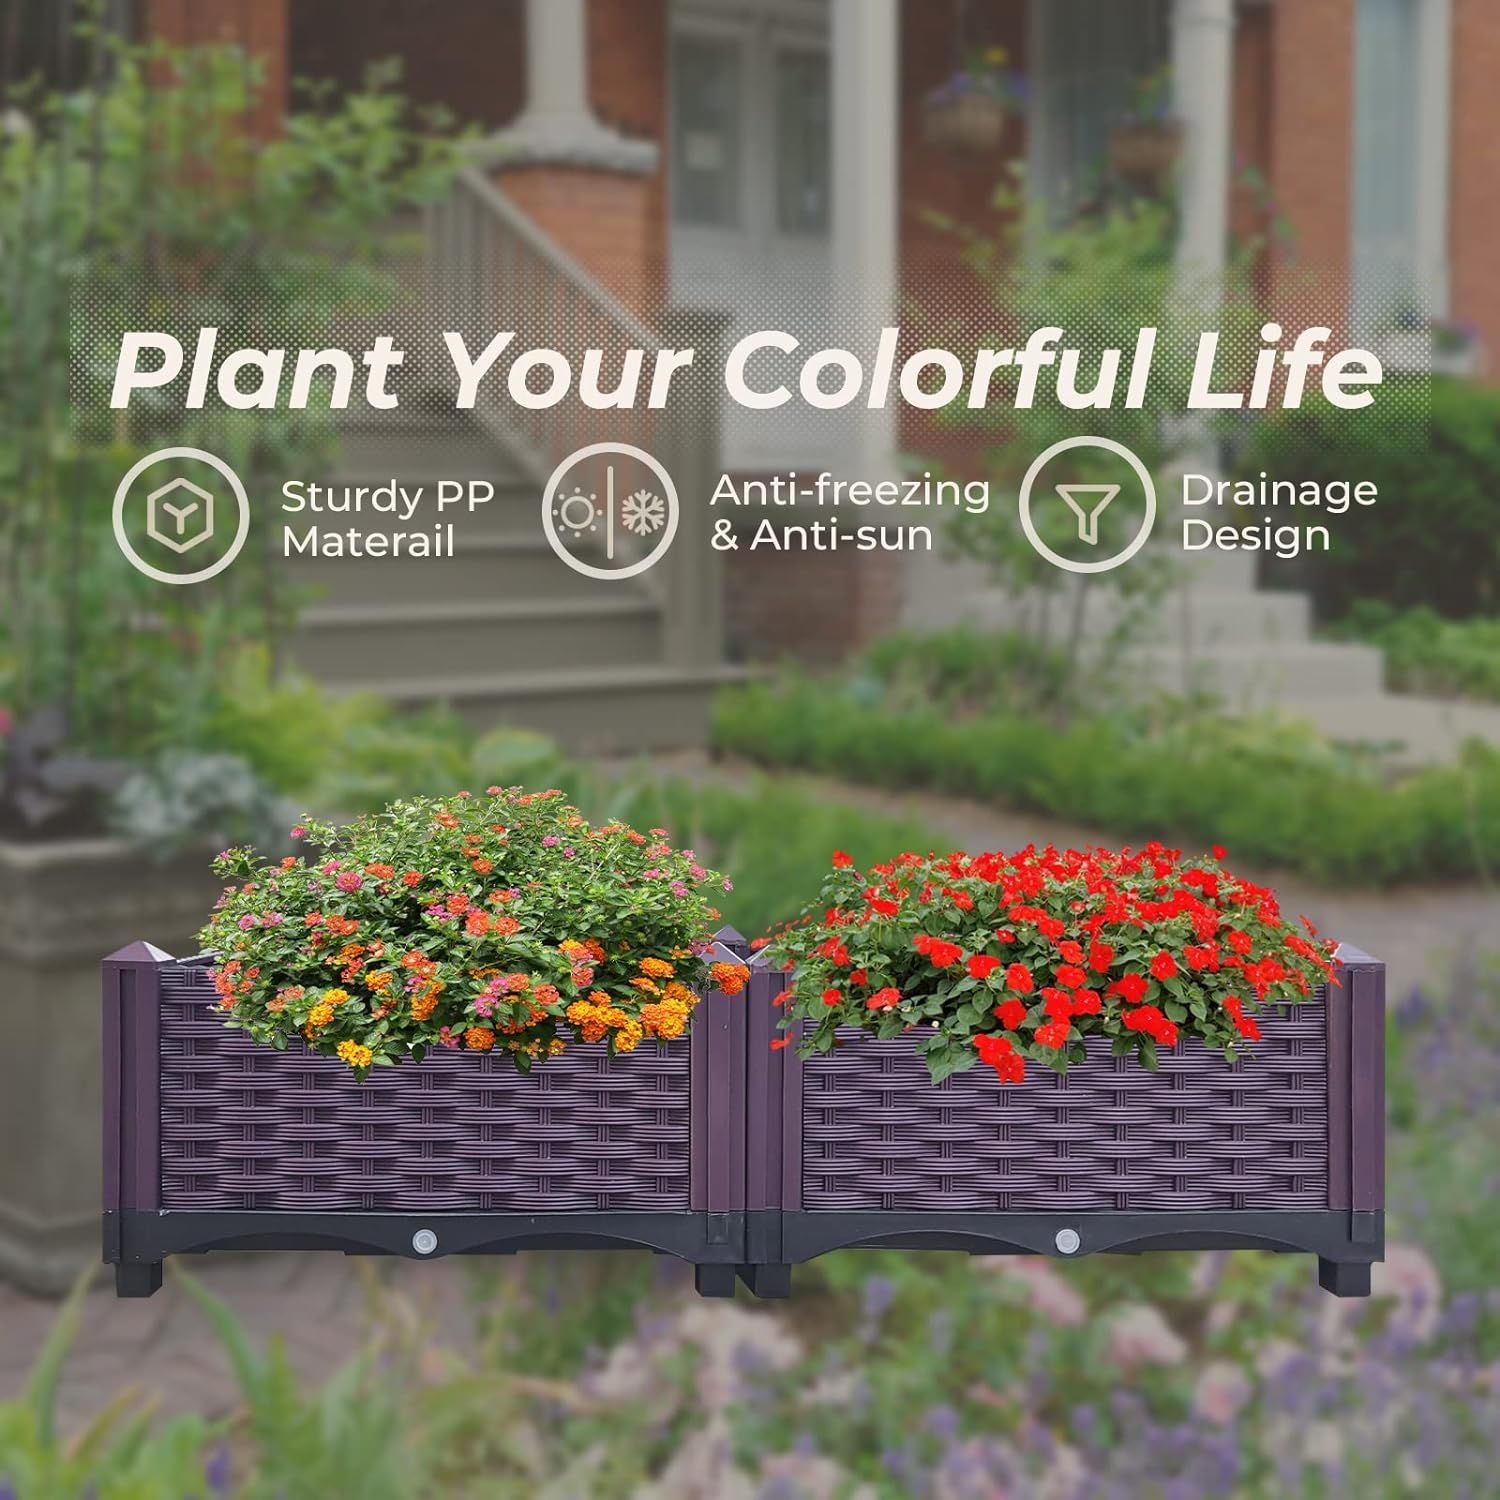 Planter Boxes Raised Garden Bed,2 Pieces Plastic Raised Garden Bed Garden Planter Boxes for Indoor & Outdoor Vegetable Fruit Flower Herb Growing Box